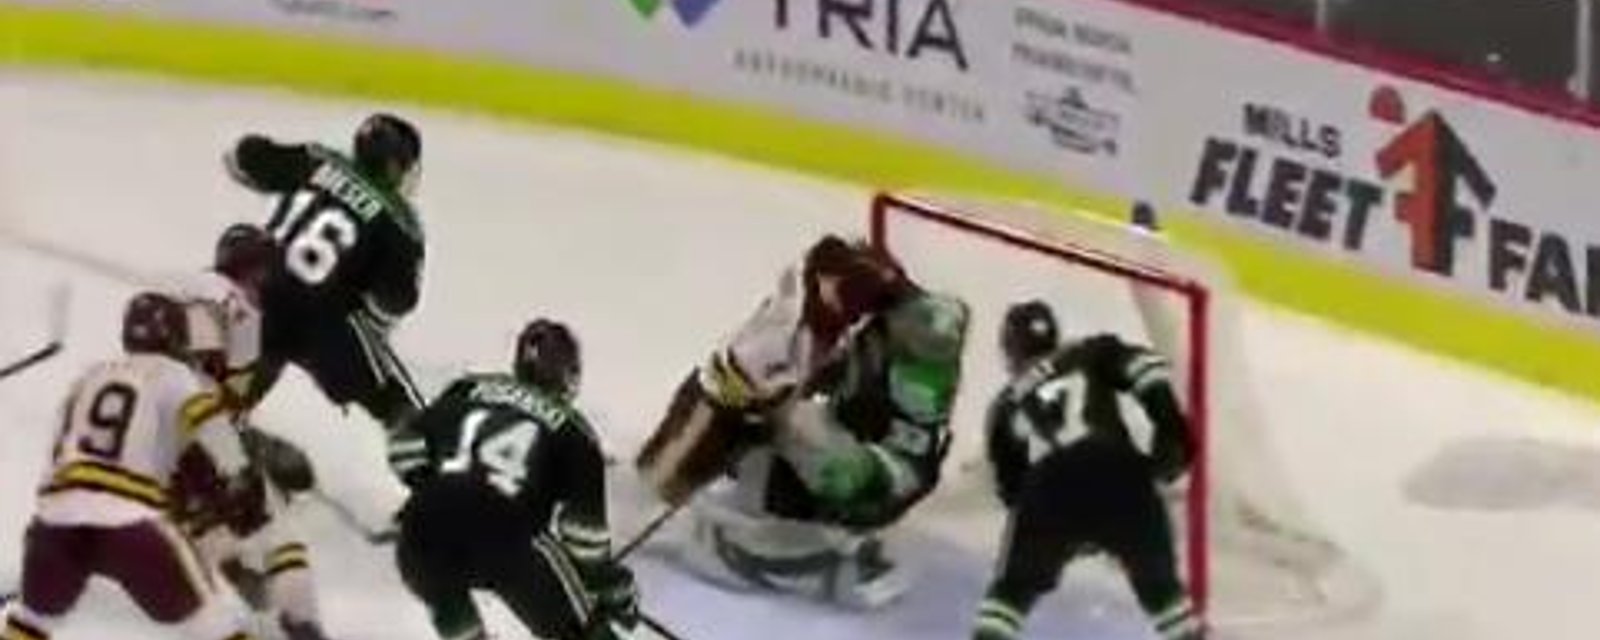 College hockey player absolutely destroys goalie, chaos ensues. 